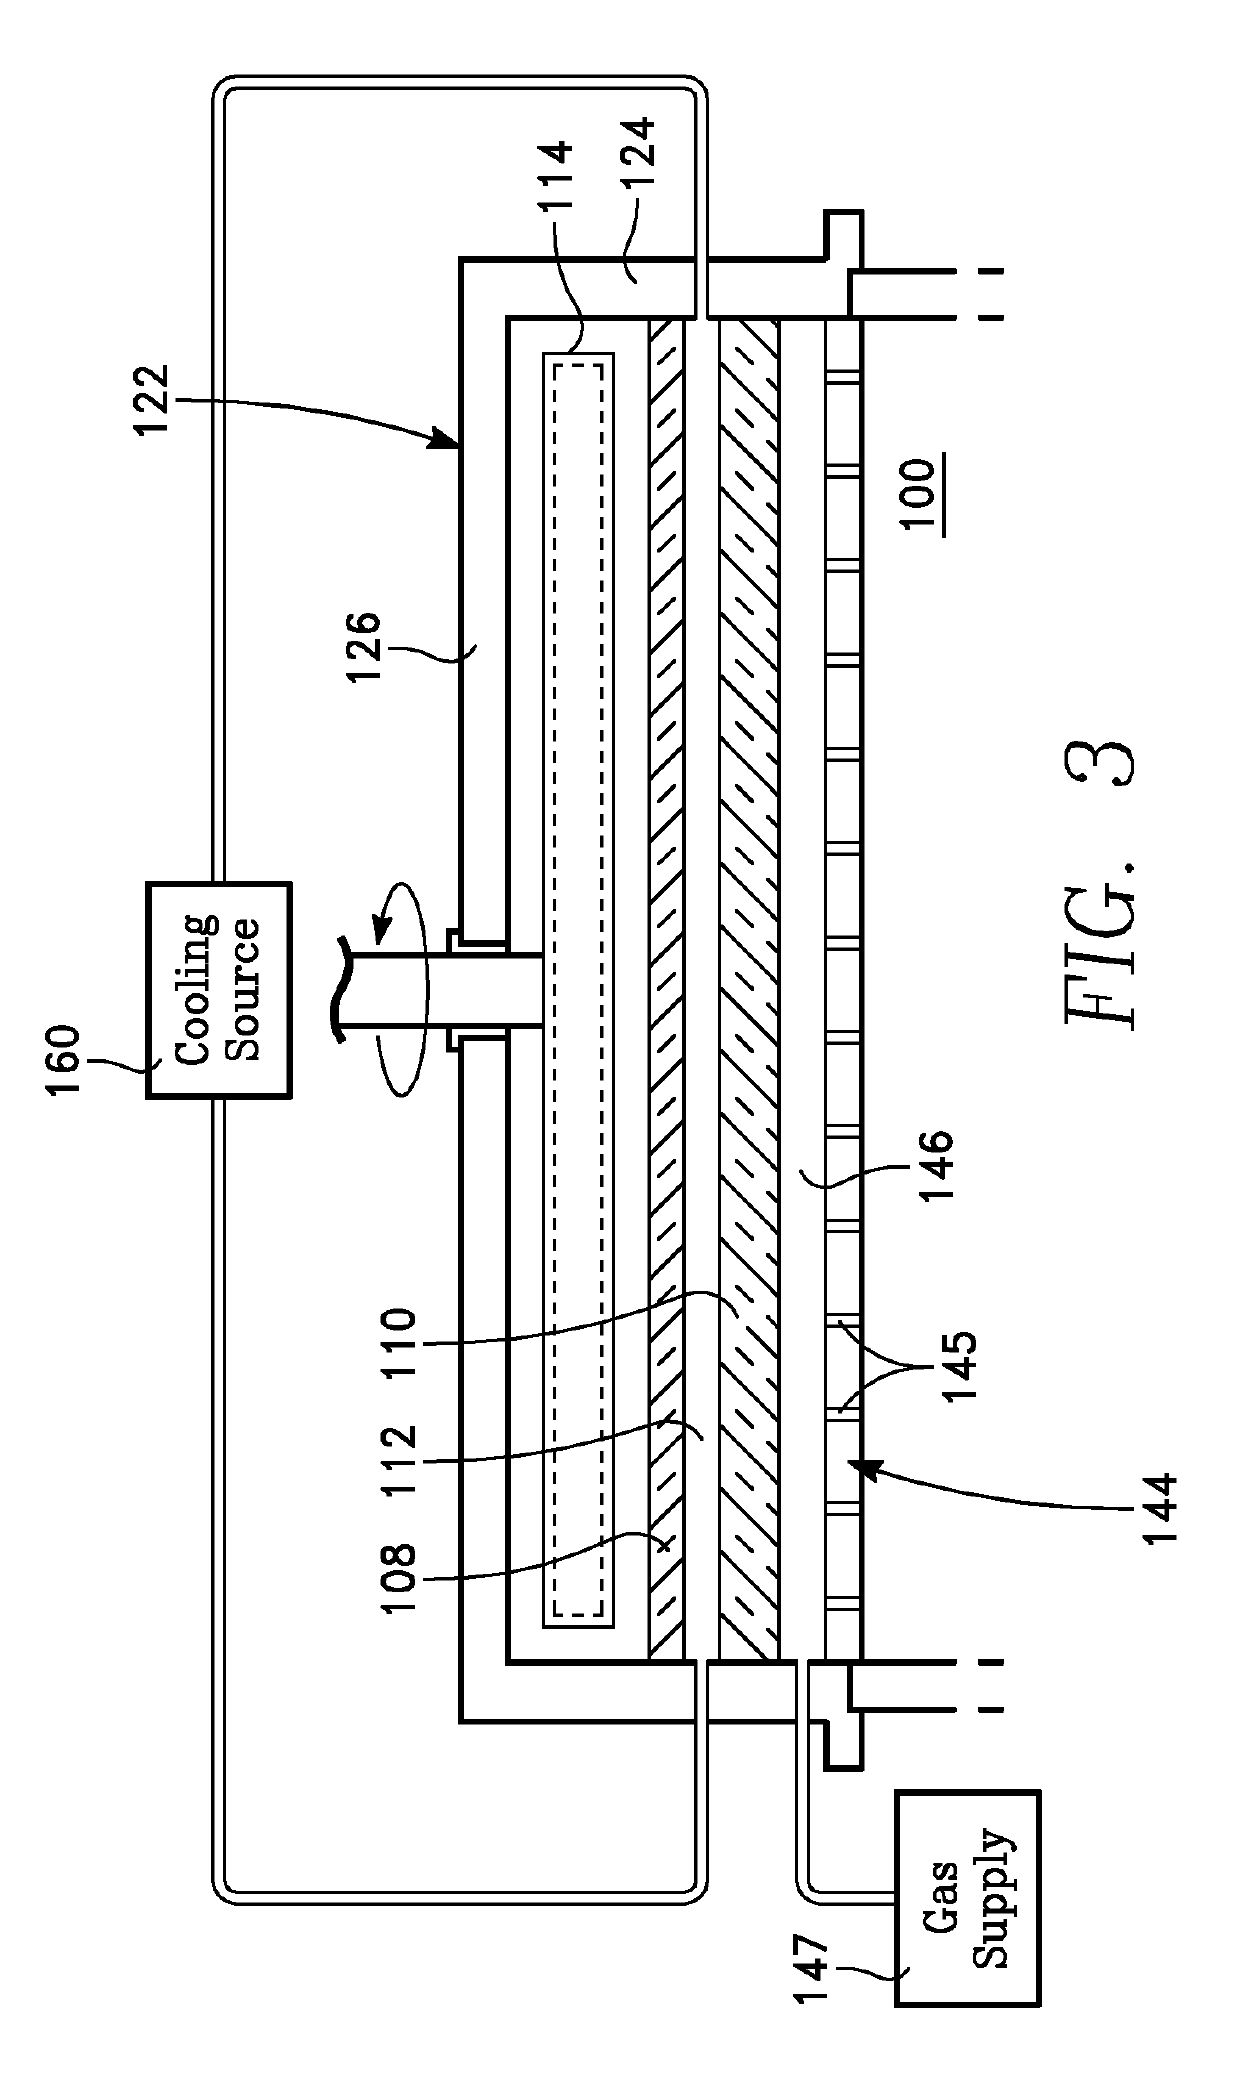 Workpiece processing chamber having a thermal controlled microwave window